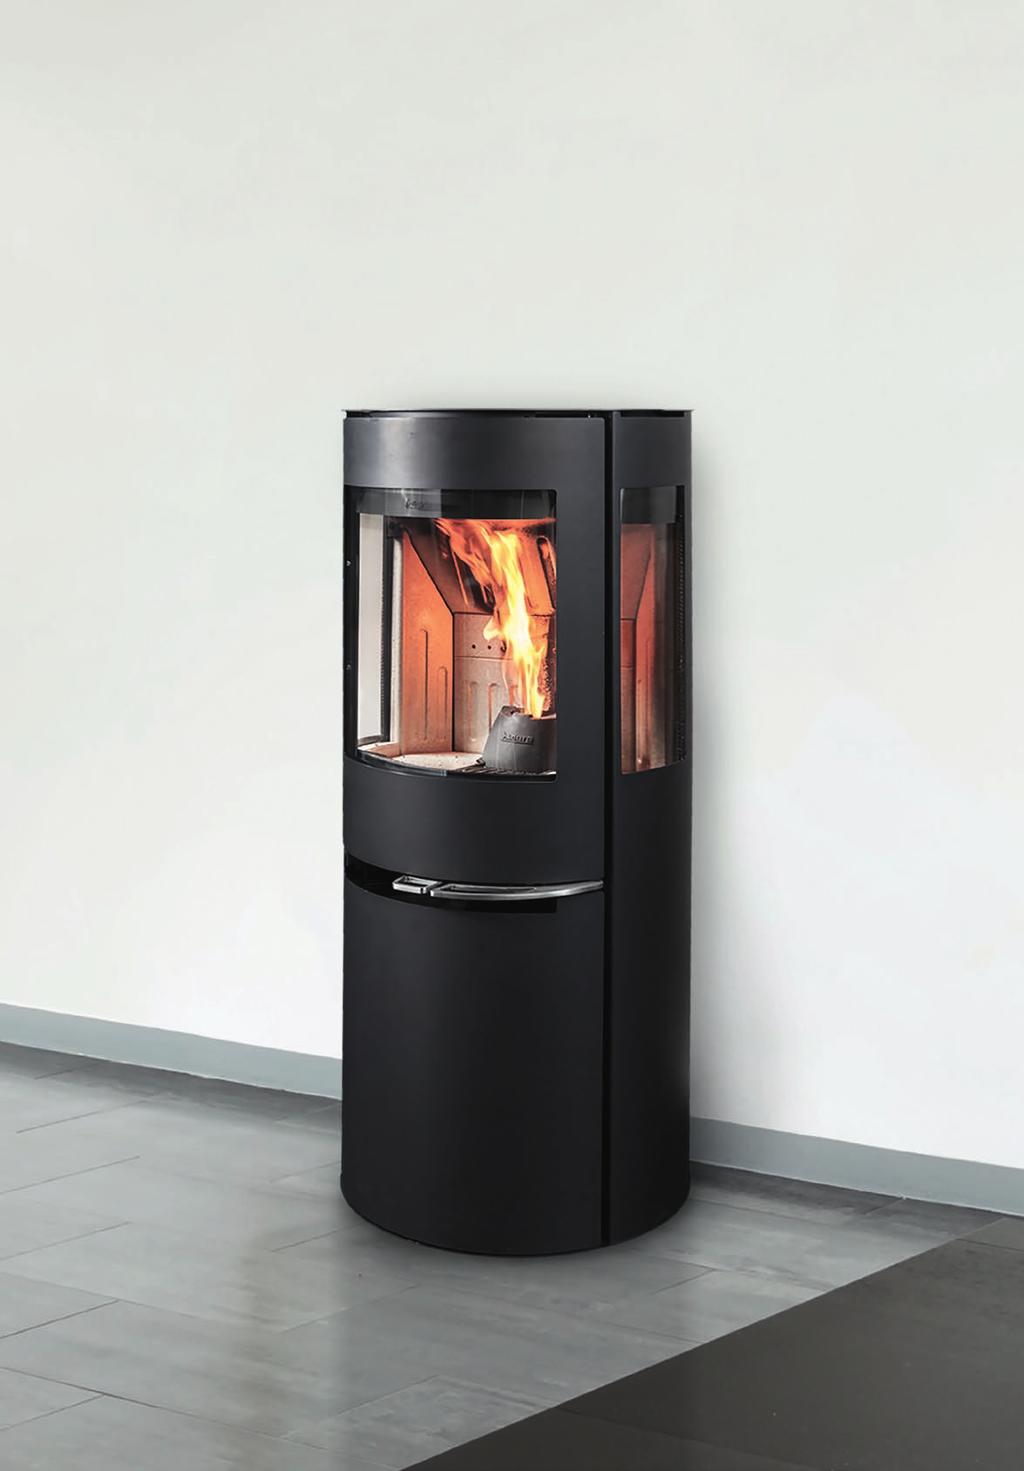 The comfort of pellets meets the beauty of firewood Easy installation Natural heat distribution through convection (no fans) Can be controlled via smartphone/ tablet